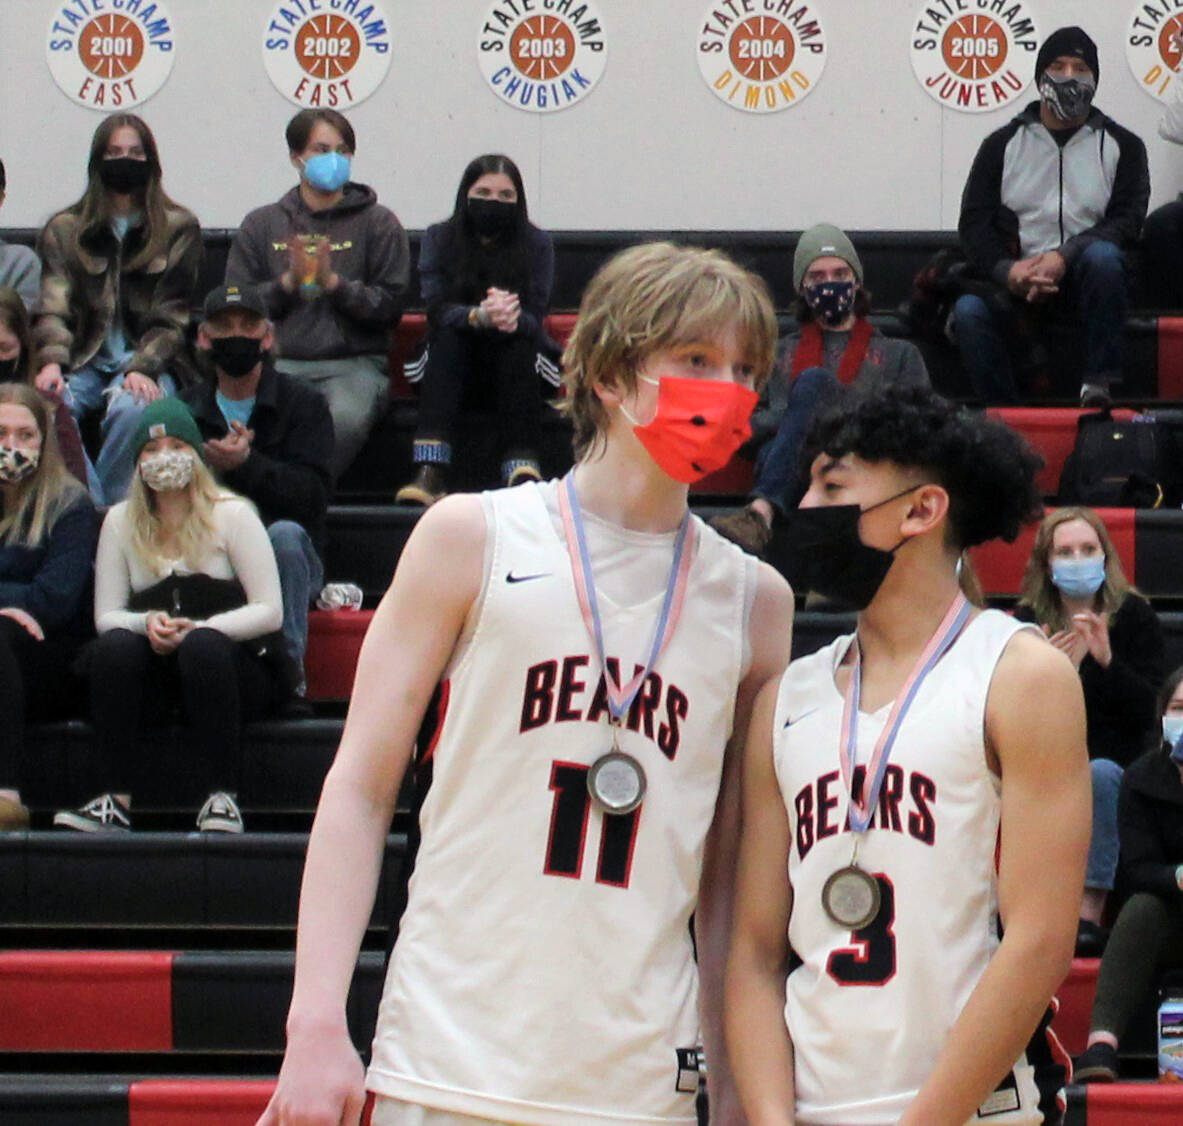 Sophomores Sean Oliver, left, and Alwen Carrillo, right, from the Juneau-Douglas High School: Yadaa.at Kalé basketball team accept all-tournament honors. (Dana Zigmund/Juneau Empire)